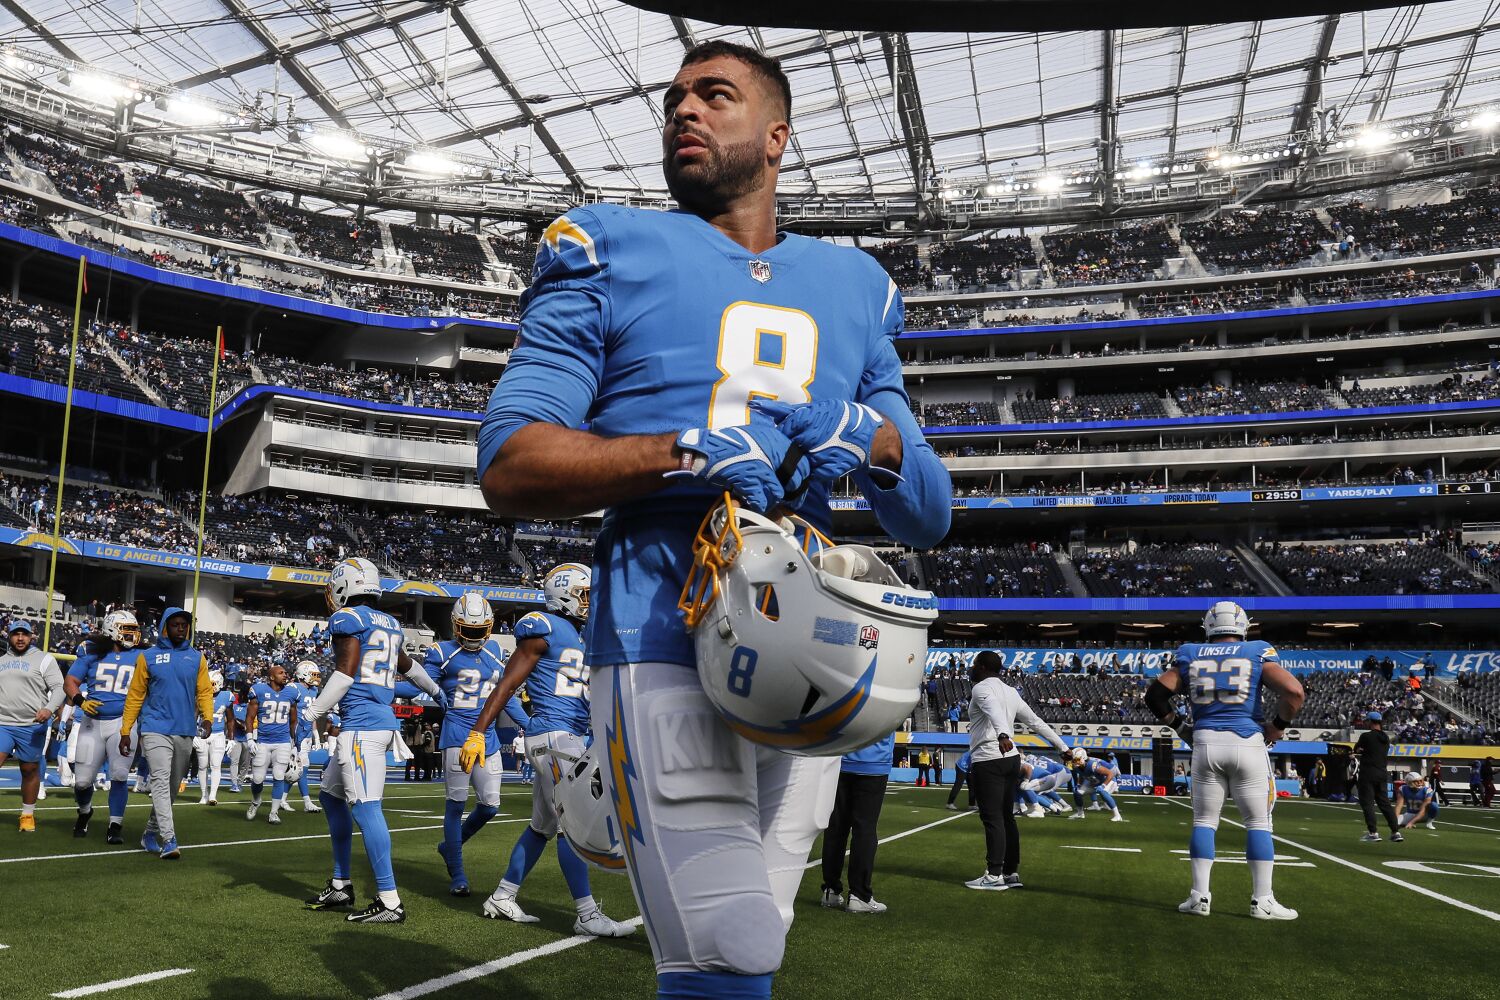 Kyle Van Noy explains why Chargers' lack of playoff experience means little